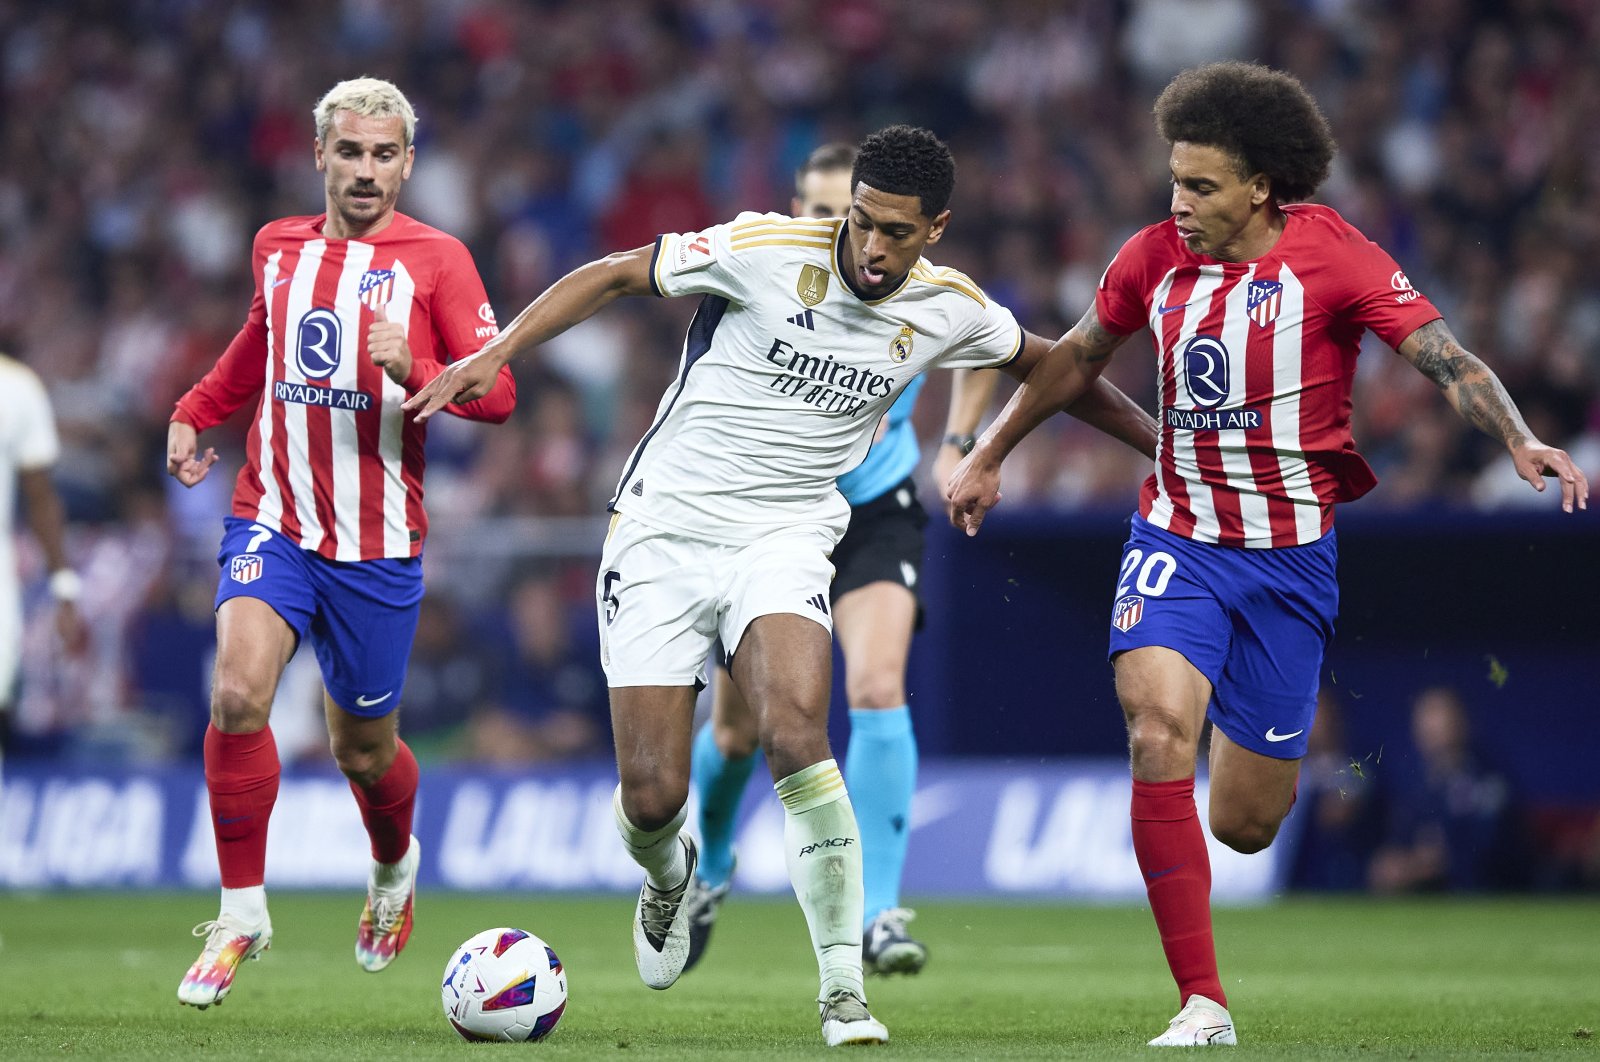 Madrid, Atletico spark triple threat row with Super Cup spectacle